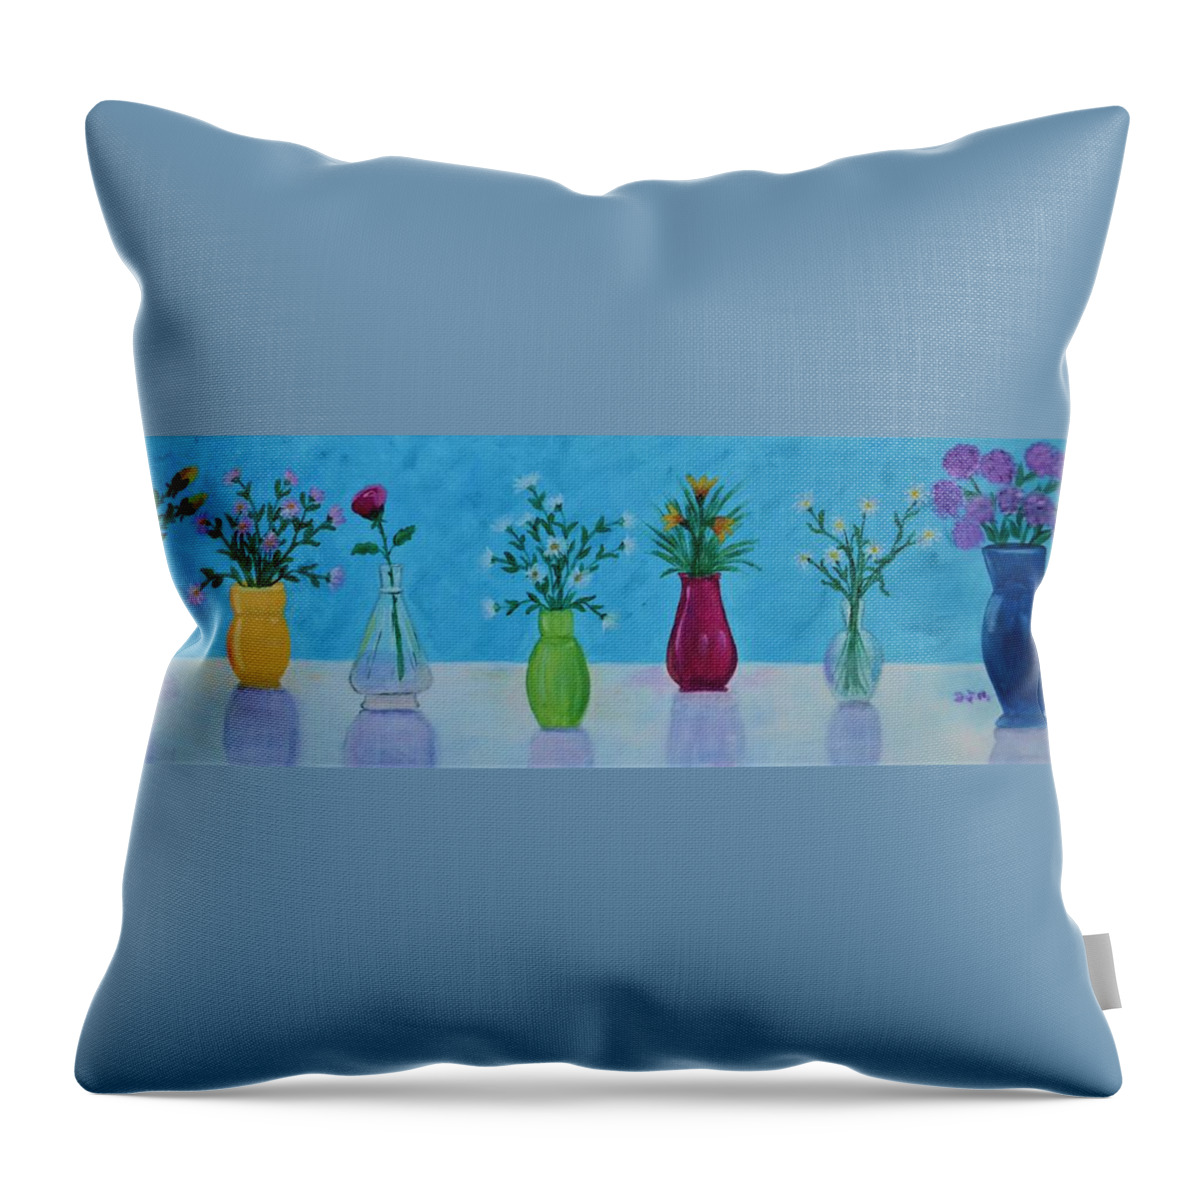 Flowers Throw Pillow featuring the painting May Flowers by Nancy Sisco